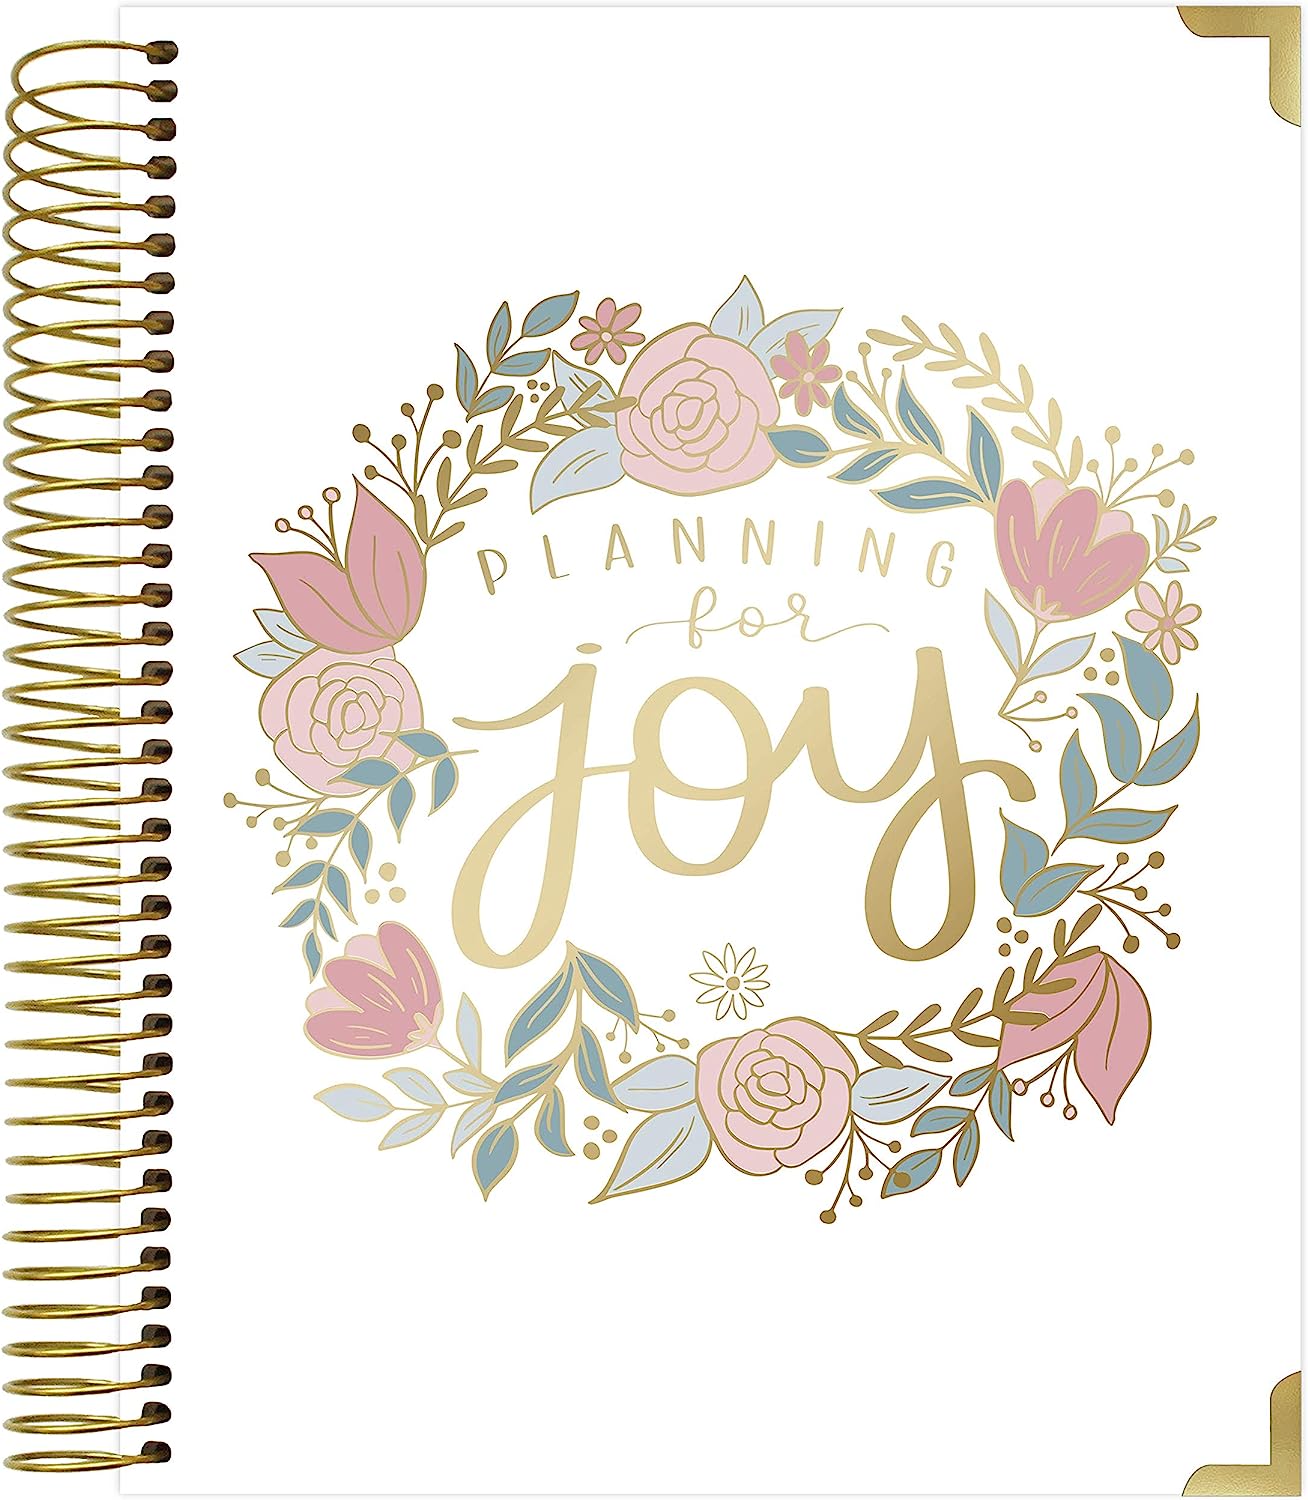 bloom daily planners New Pregnancy and Baby's First Year Calendar Planner & Keepsake Journal with Stickers